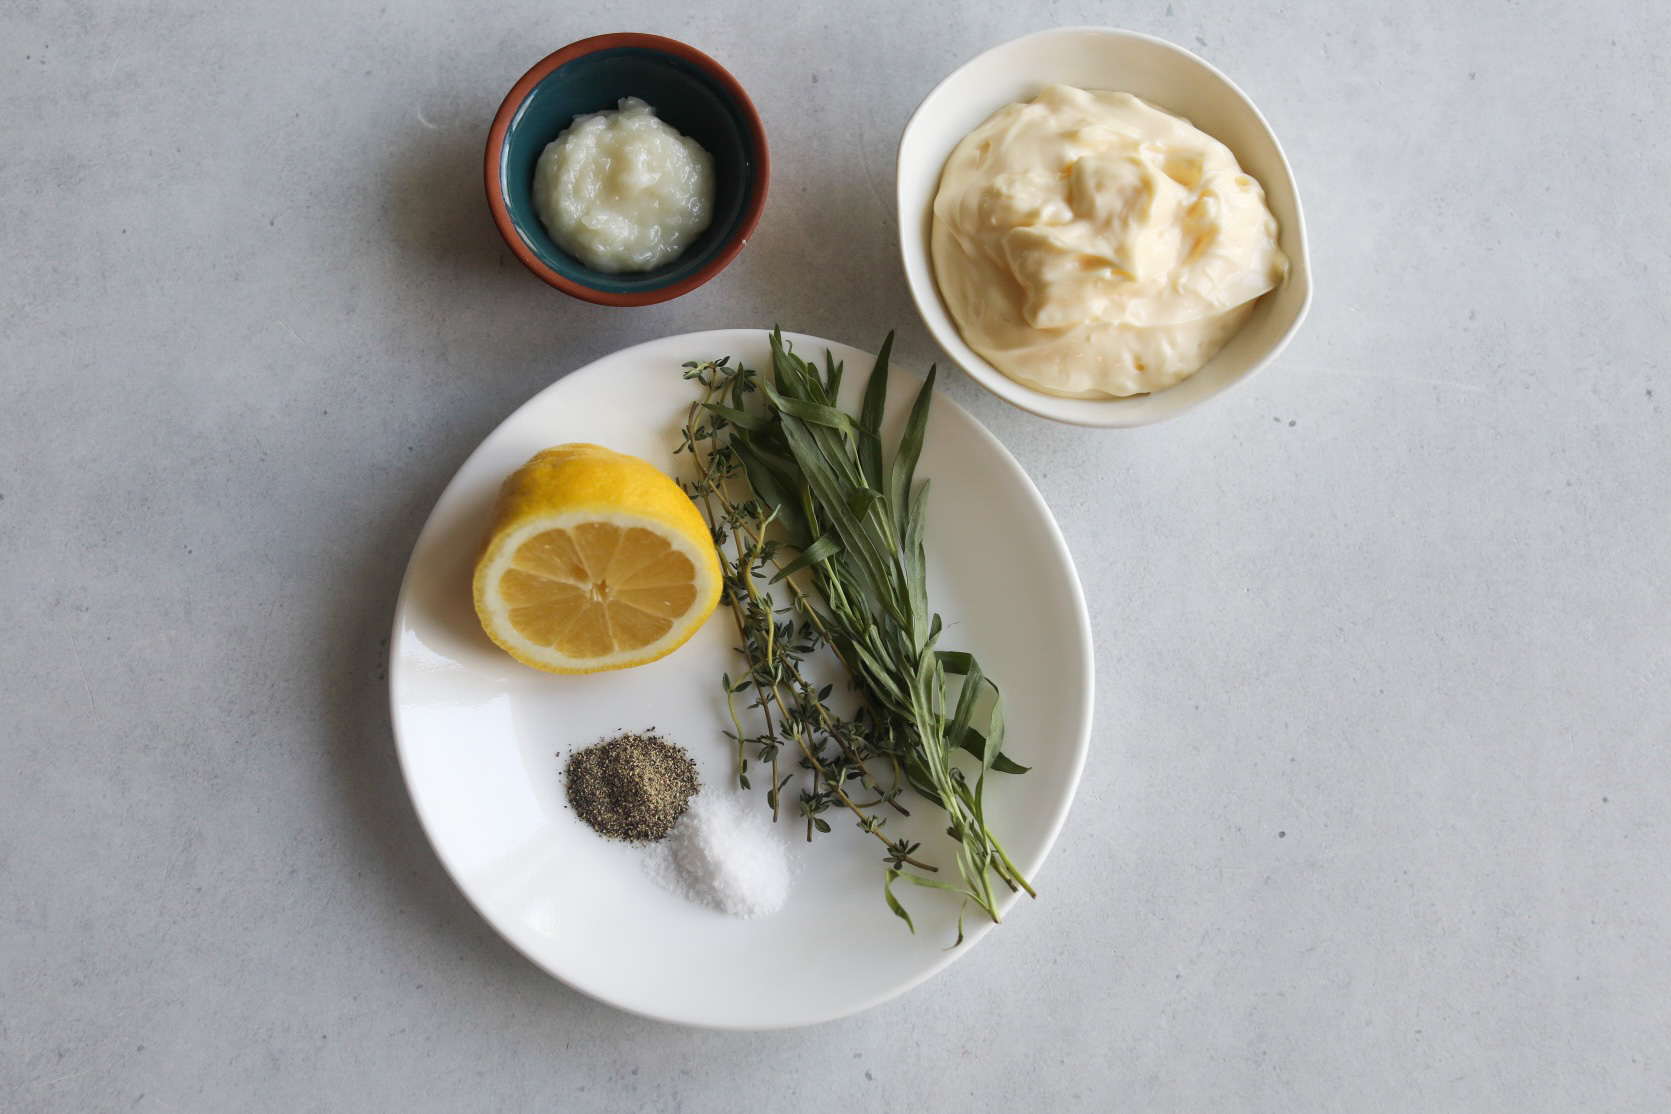 Herb-garlic aiolo sauce ingredients. On a small white plate; salt and pepper, half of a lemon, fresh tarragon and thyme. In a small white bowl is mayonnaise. A small bowl is also filled with garlic paste.